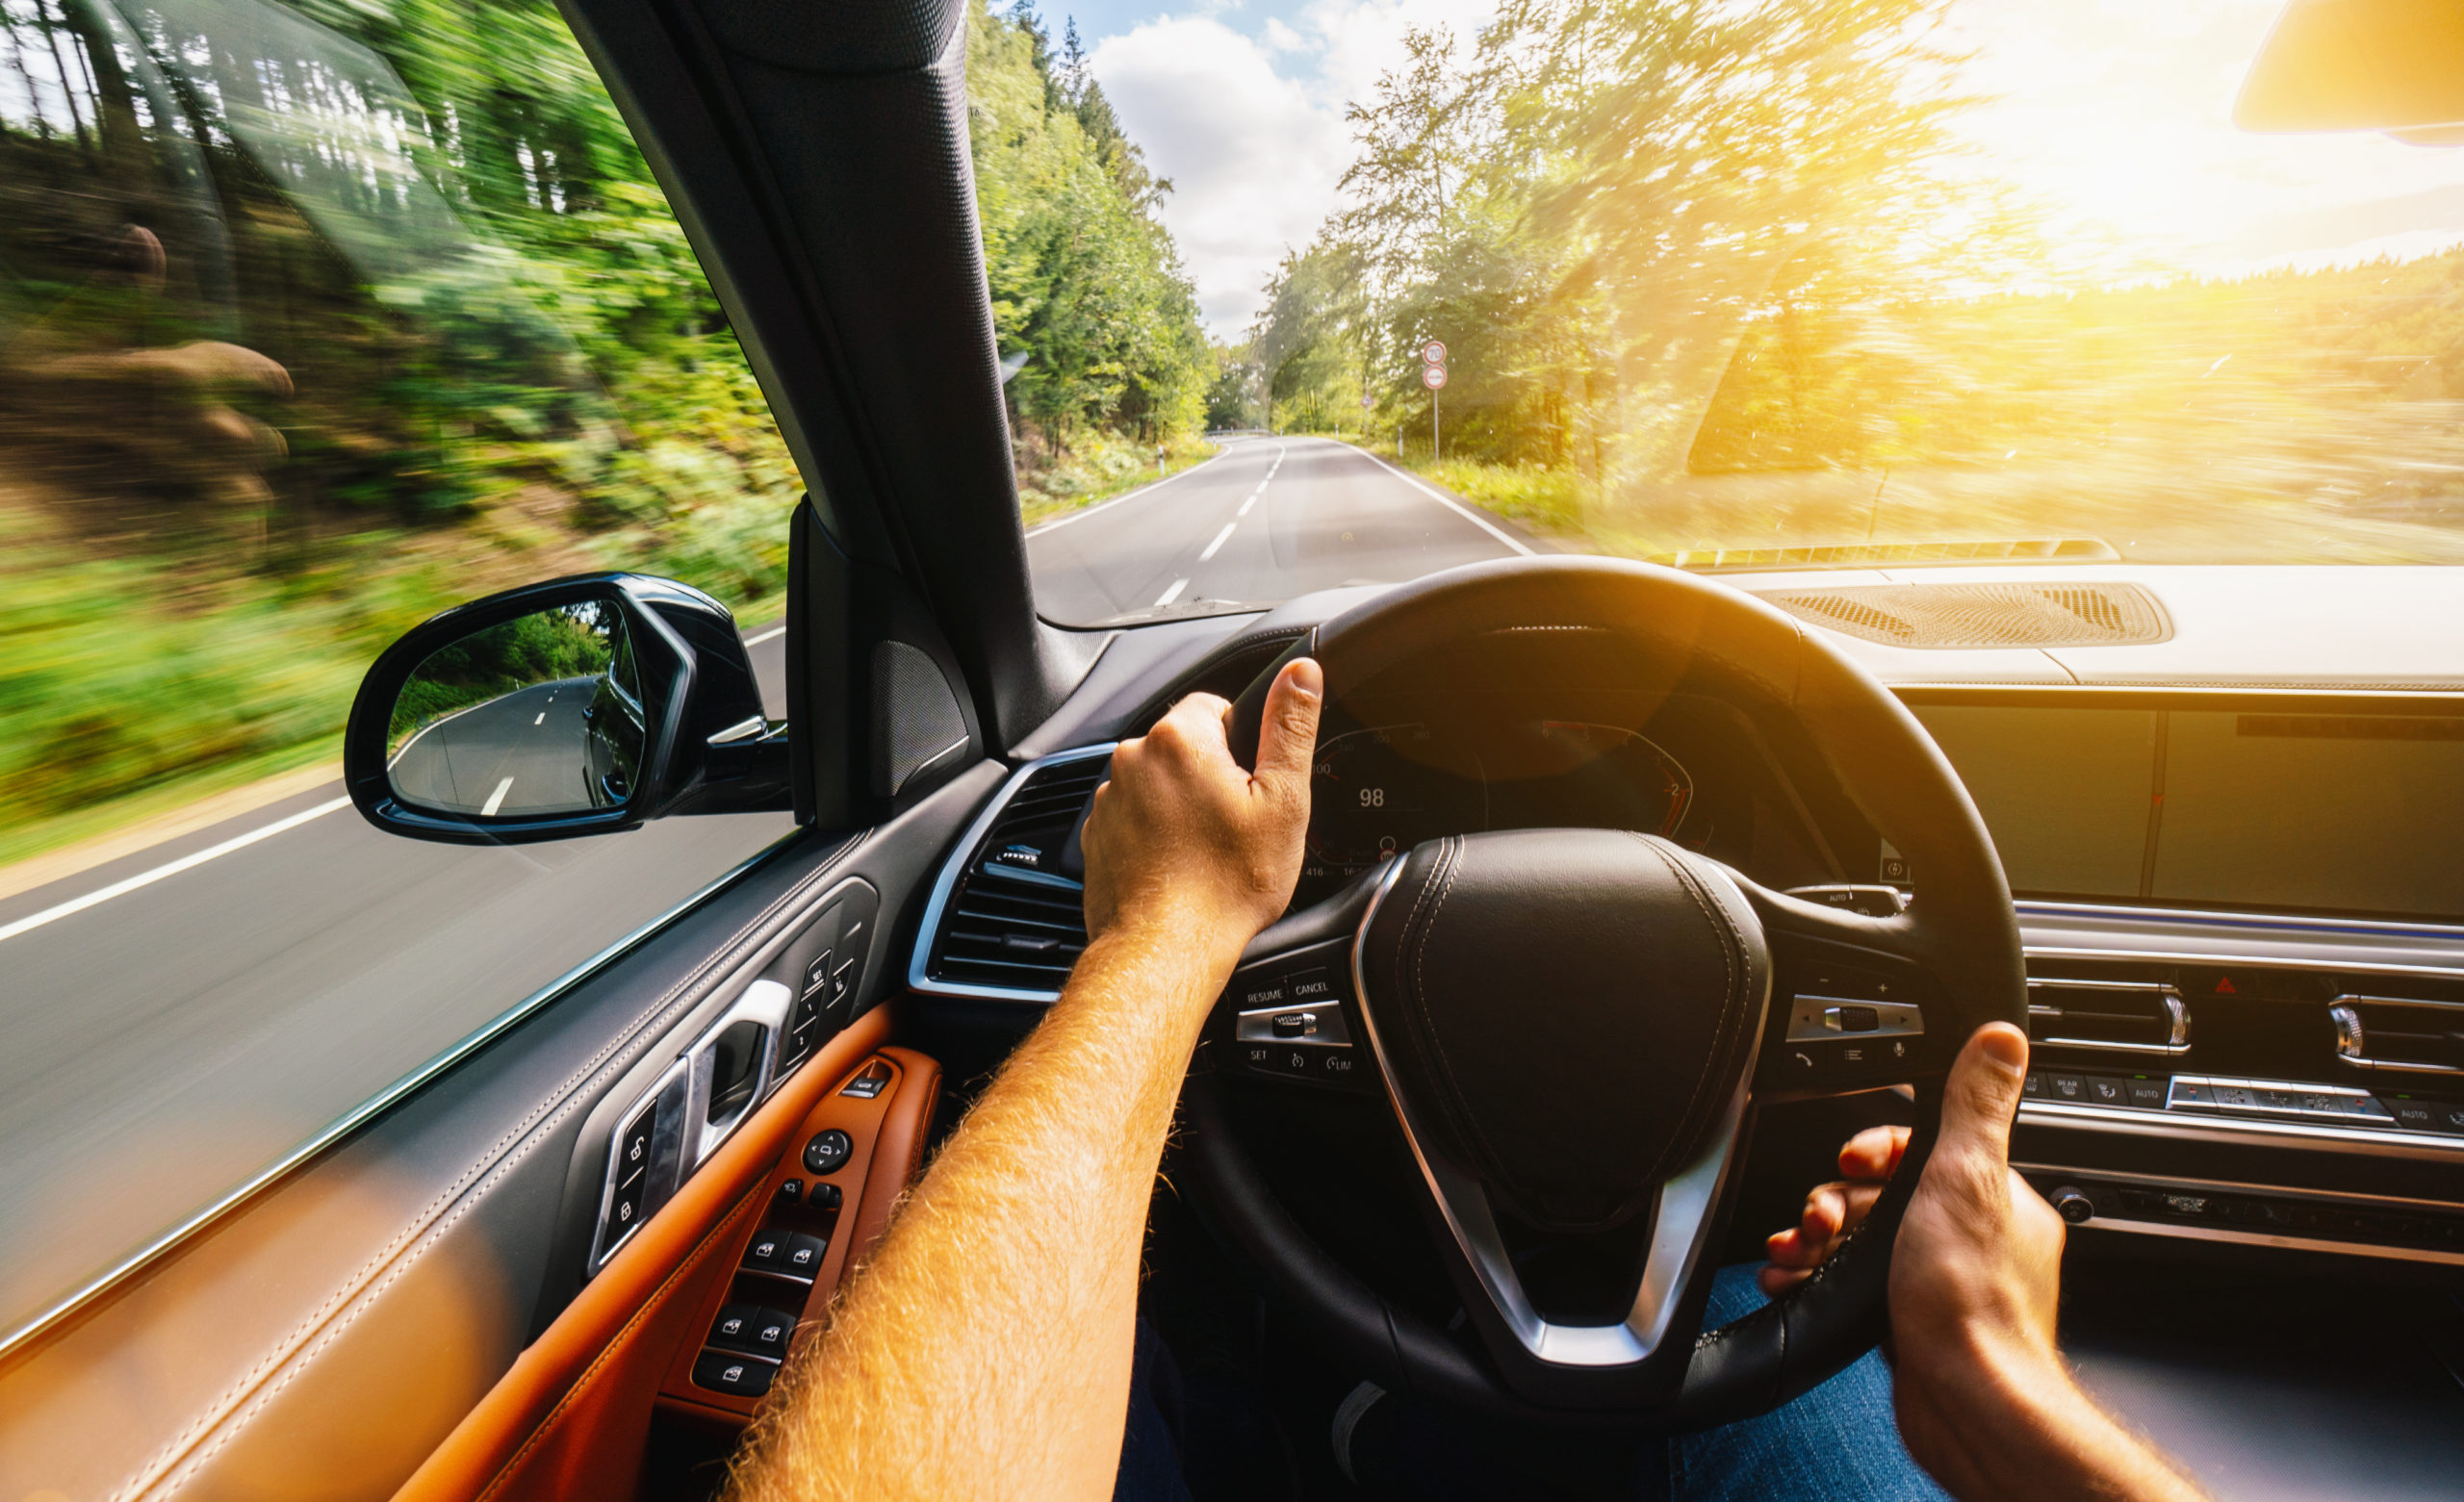 8 Tips for a Safer Driving Experience